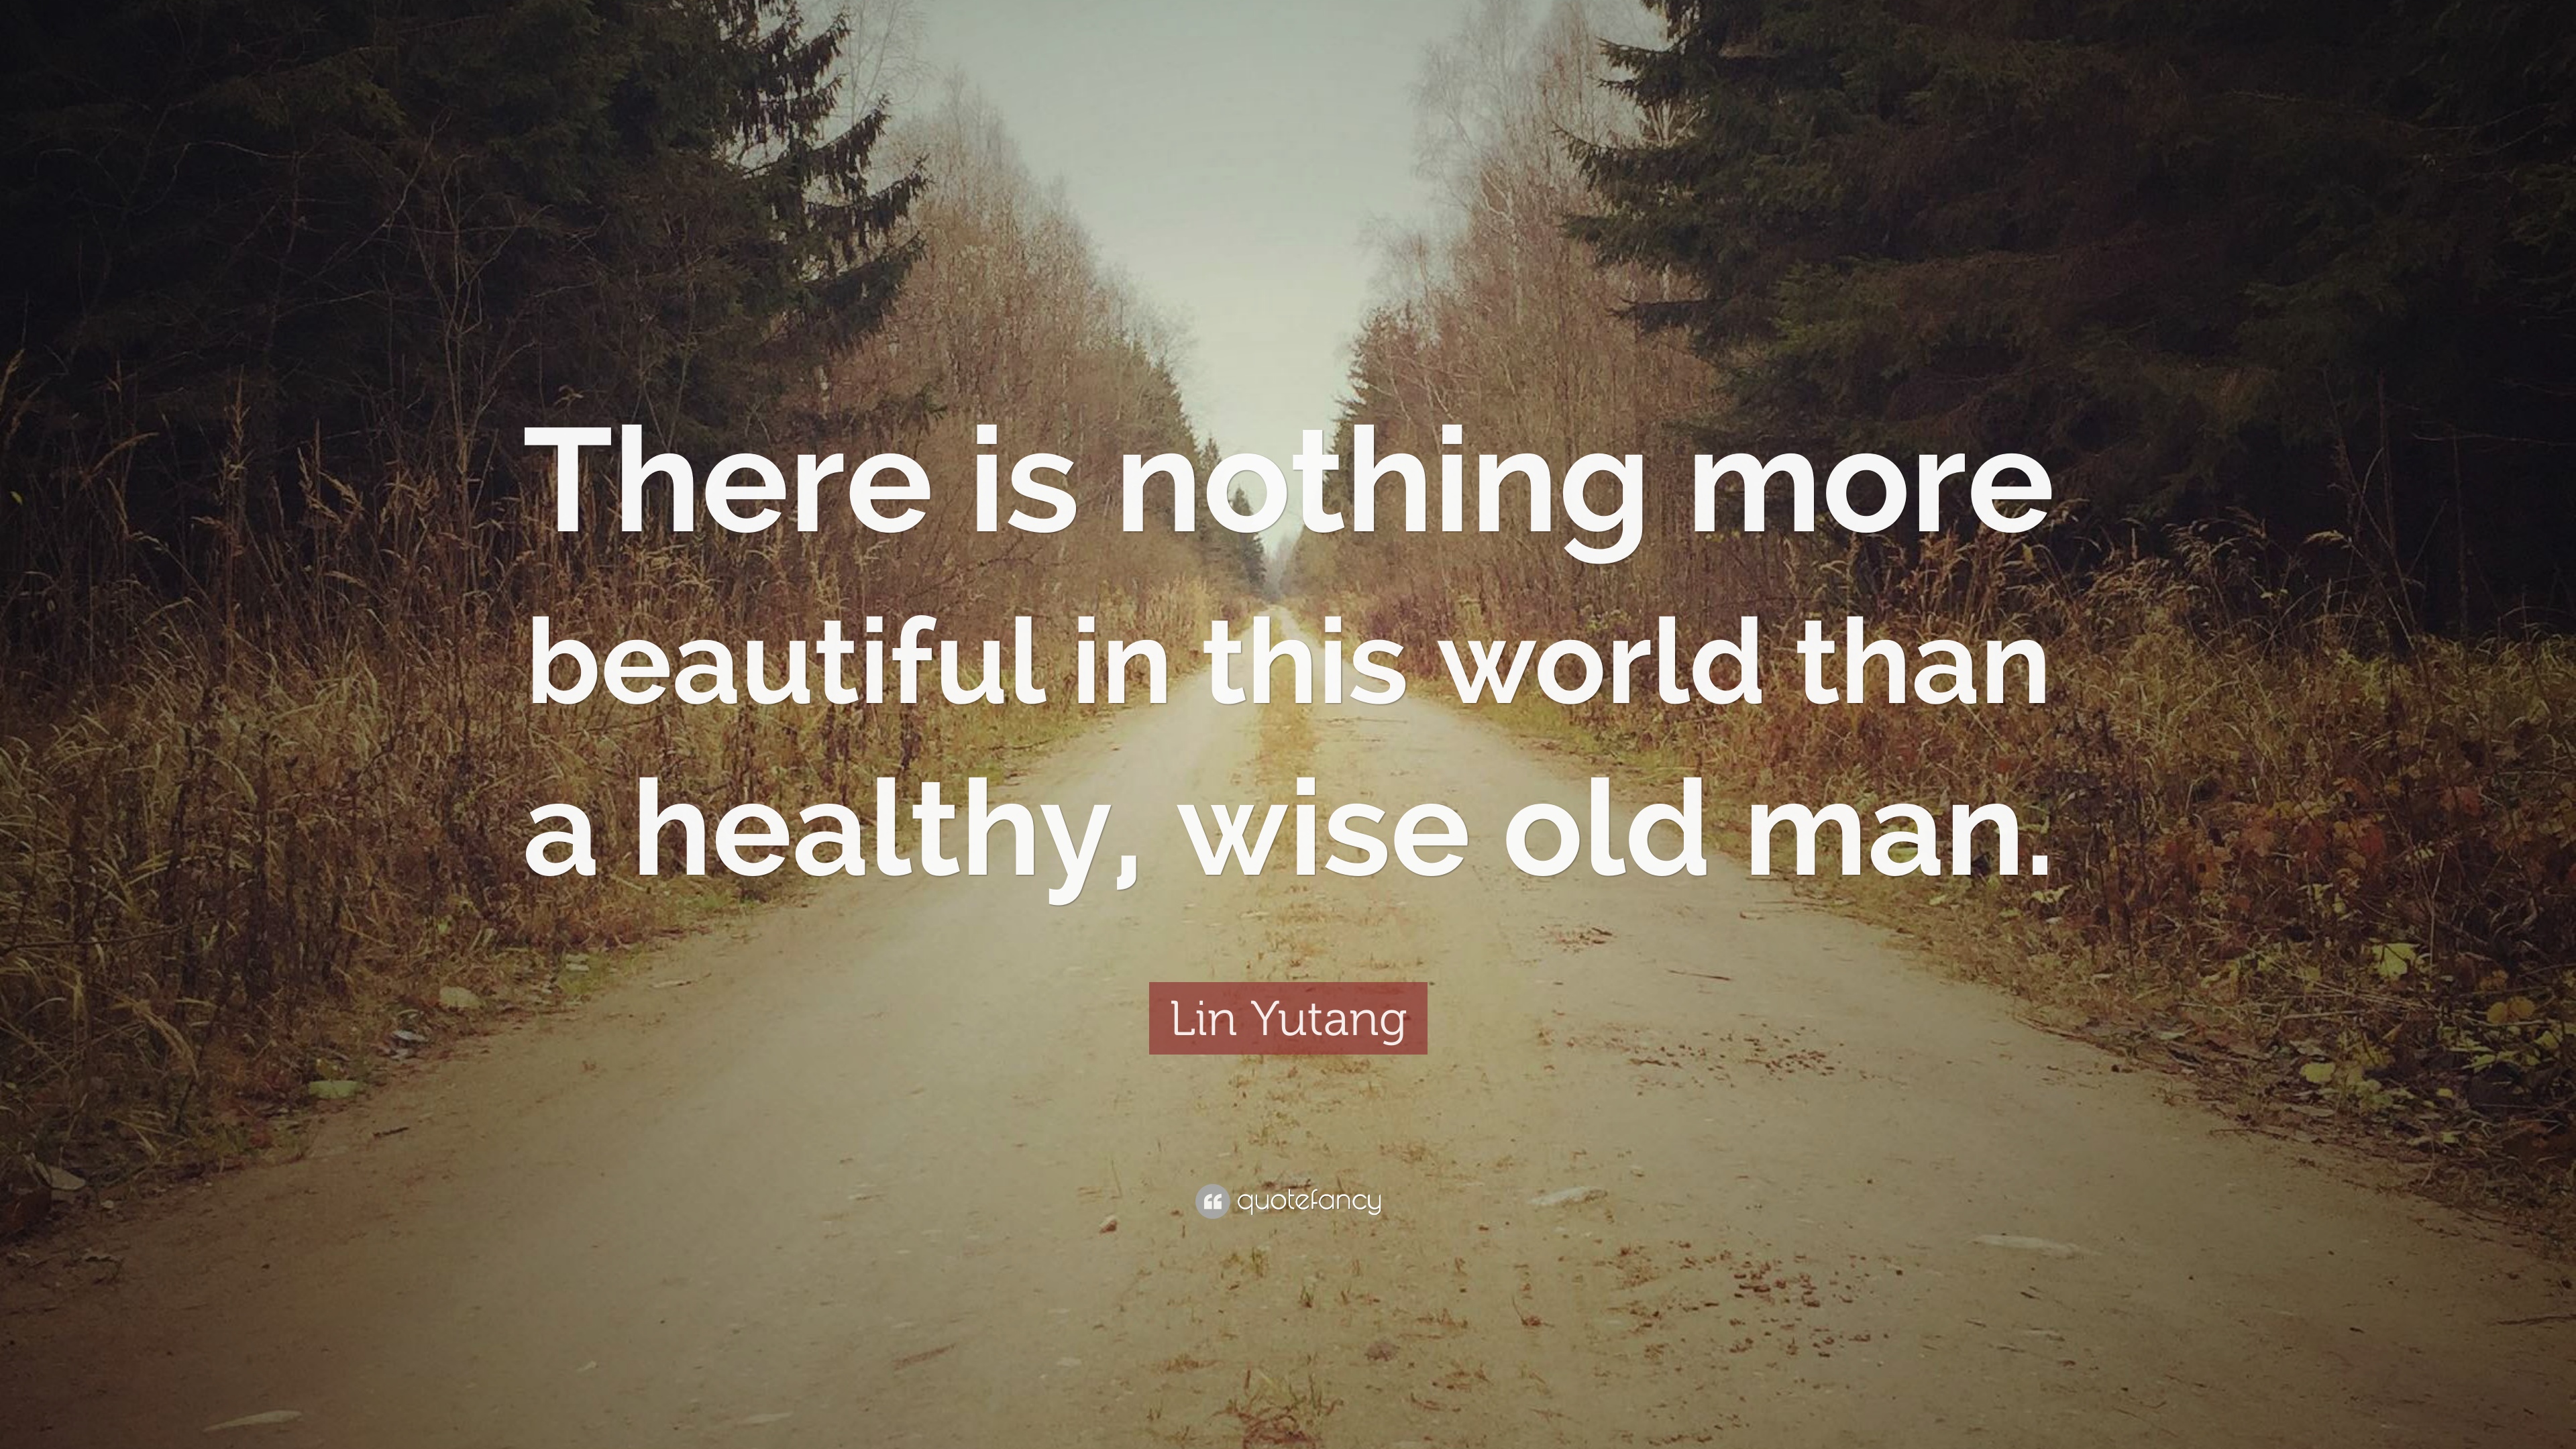 Lin Yutang Quote: “There is nothing more beautiful in this world